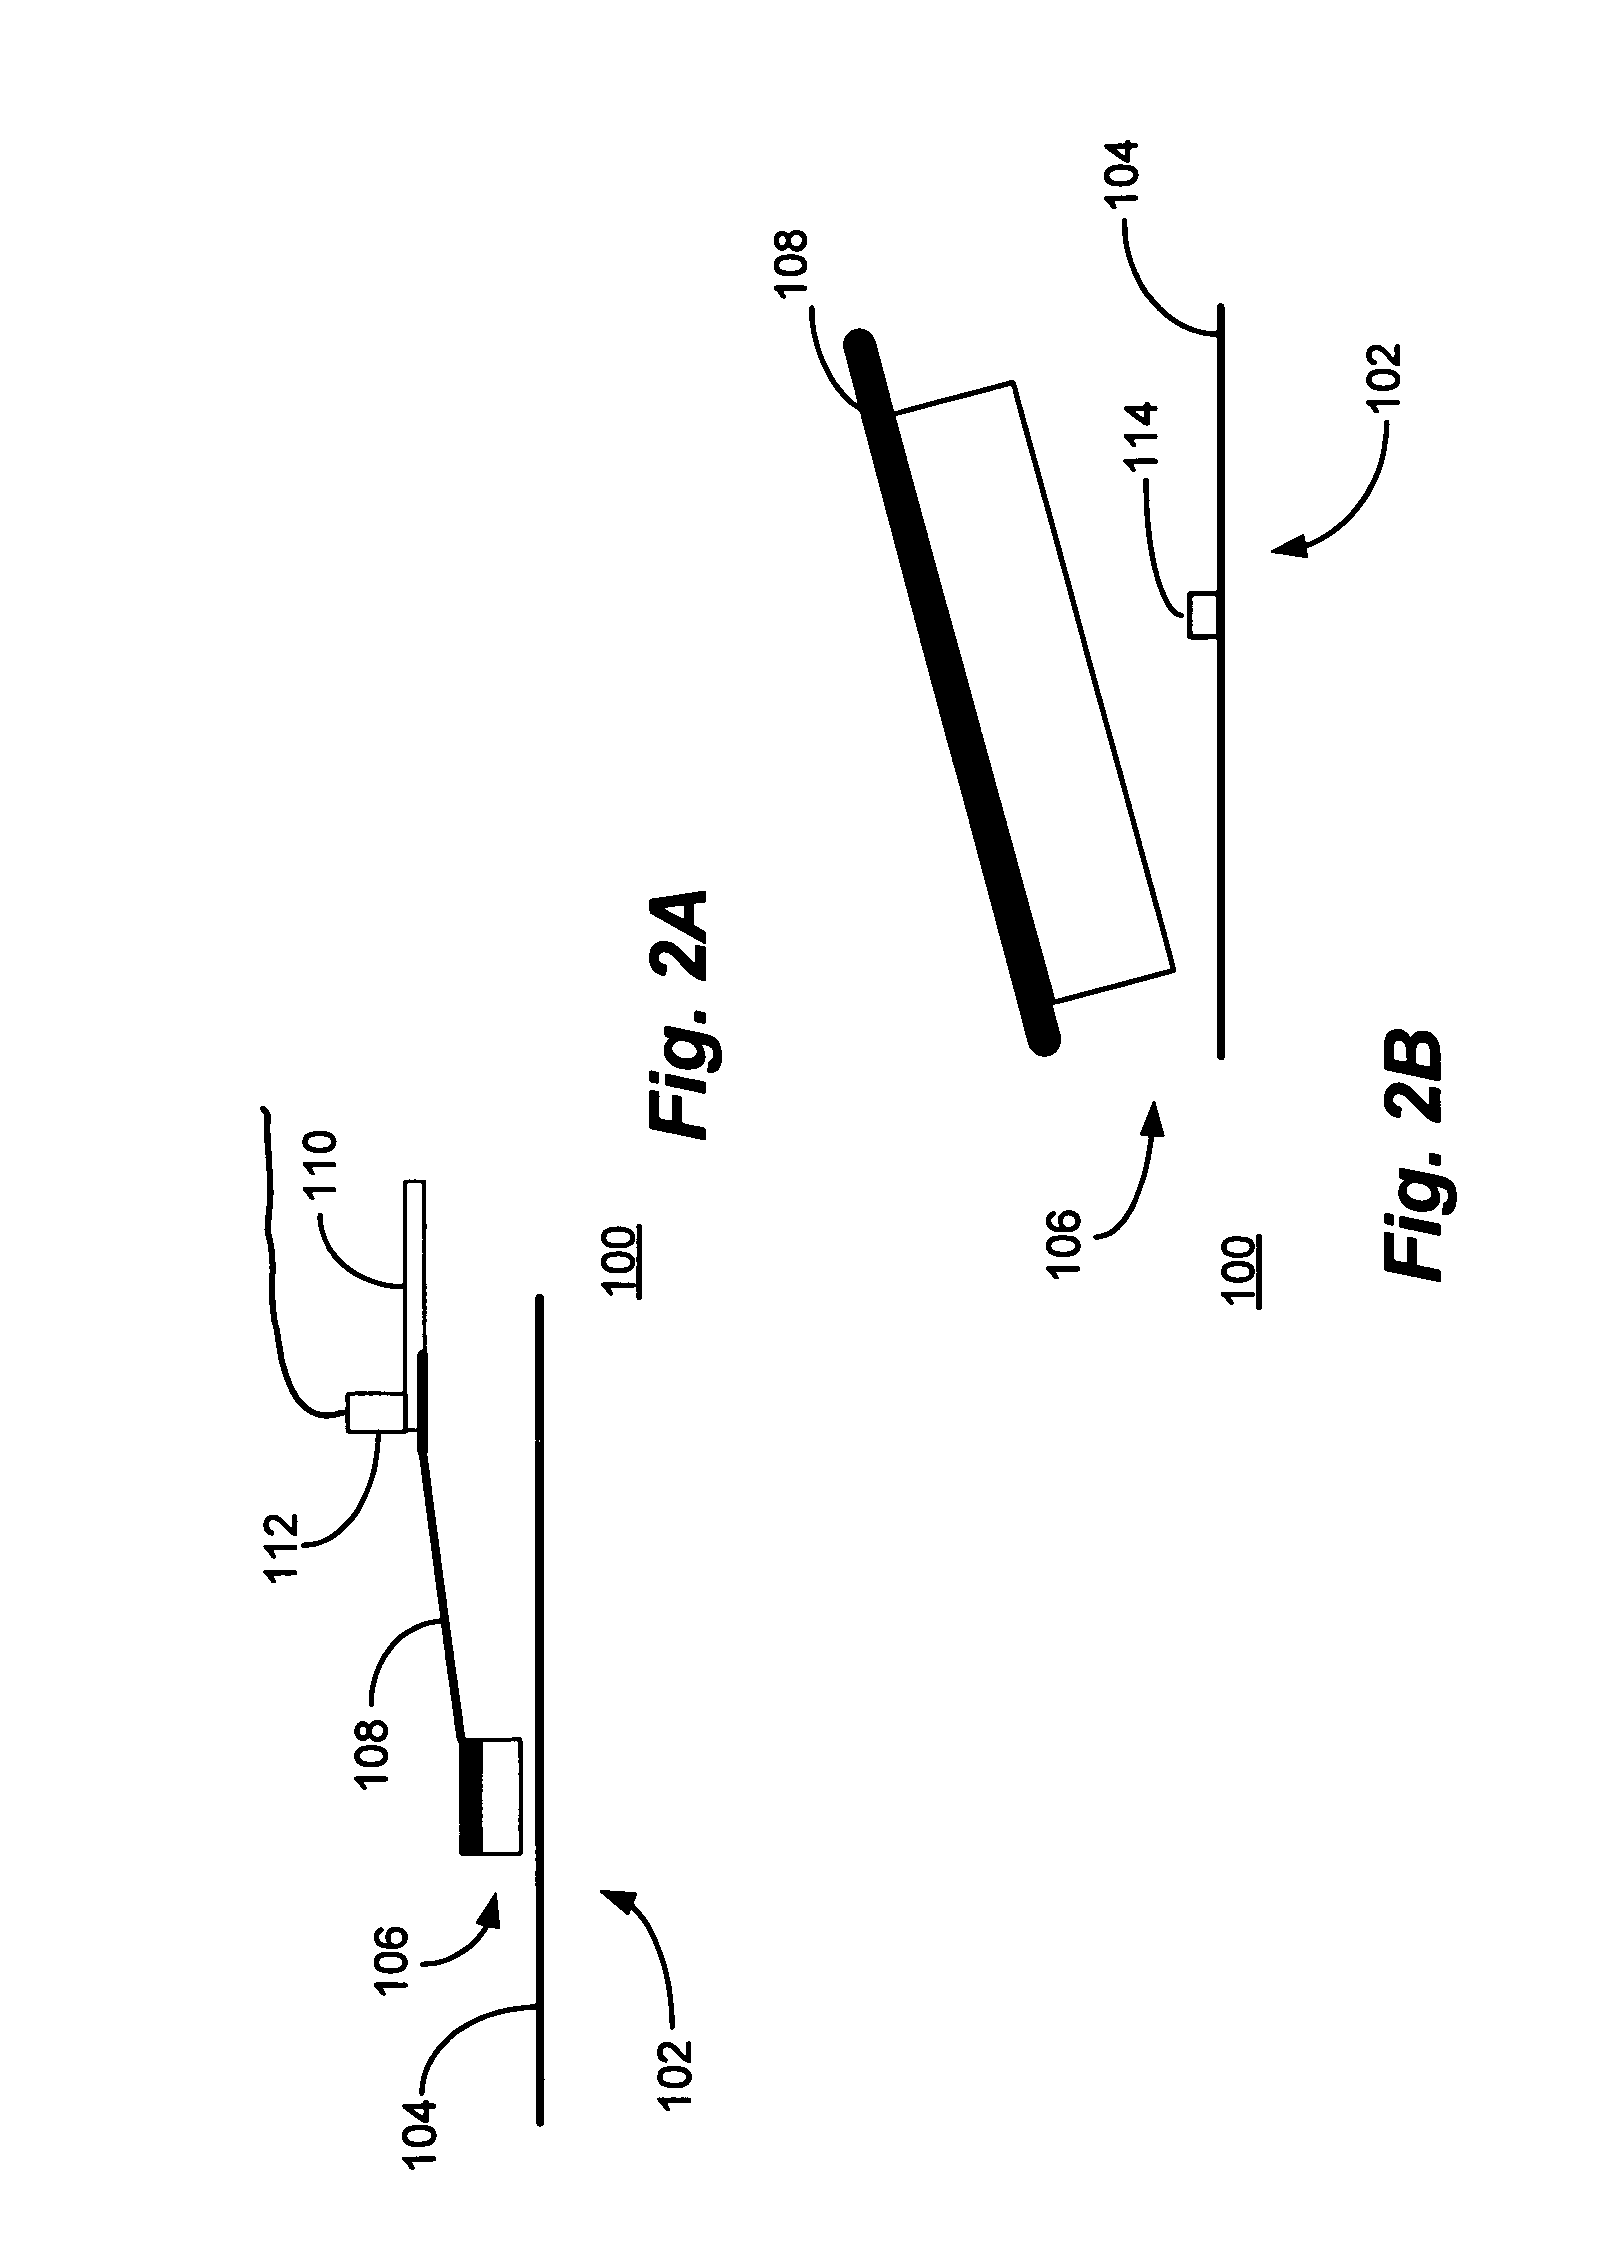 System for manufacturing a group of head gimbal assemblies (HGAs)